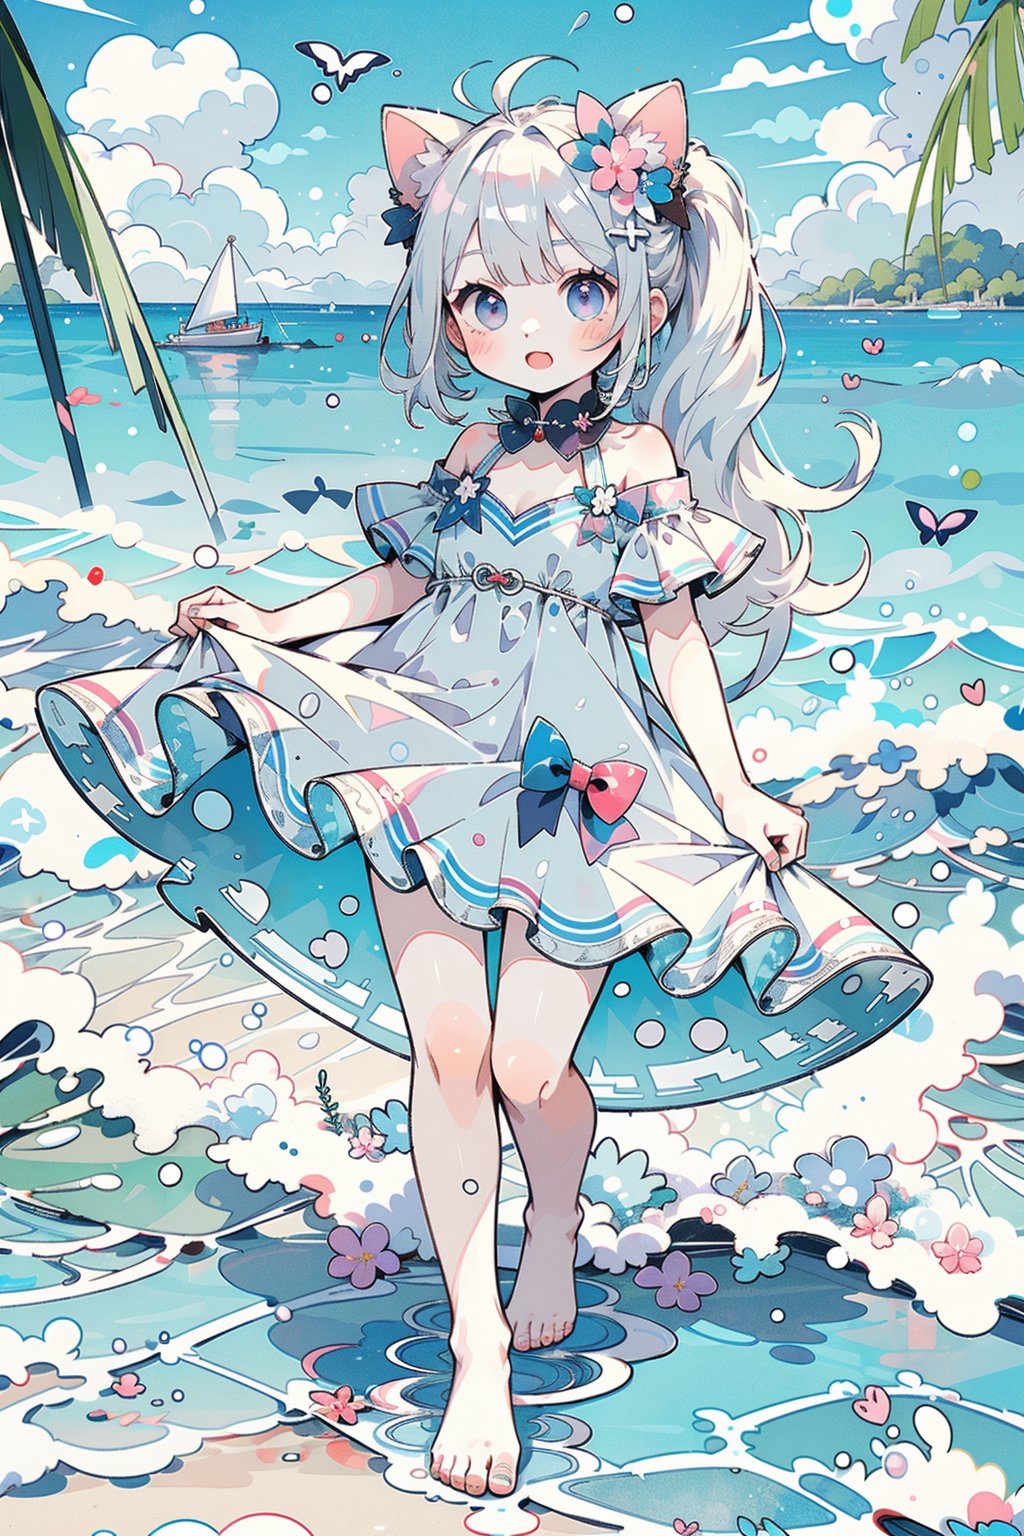 (masterpiece, best quality, highres:1.3), ultra resolution image, (1girl), (solo), full body, kawaii, little girl, kawaii, silver short pony tail, fringe, violet eyes, bare foot,dress, beach, sea, water, cat